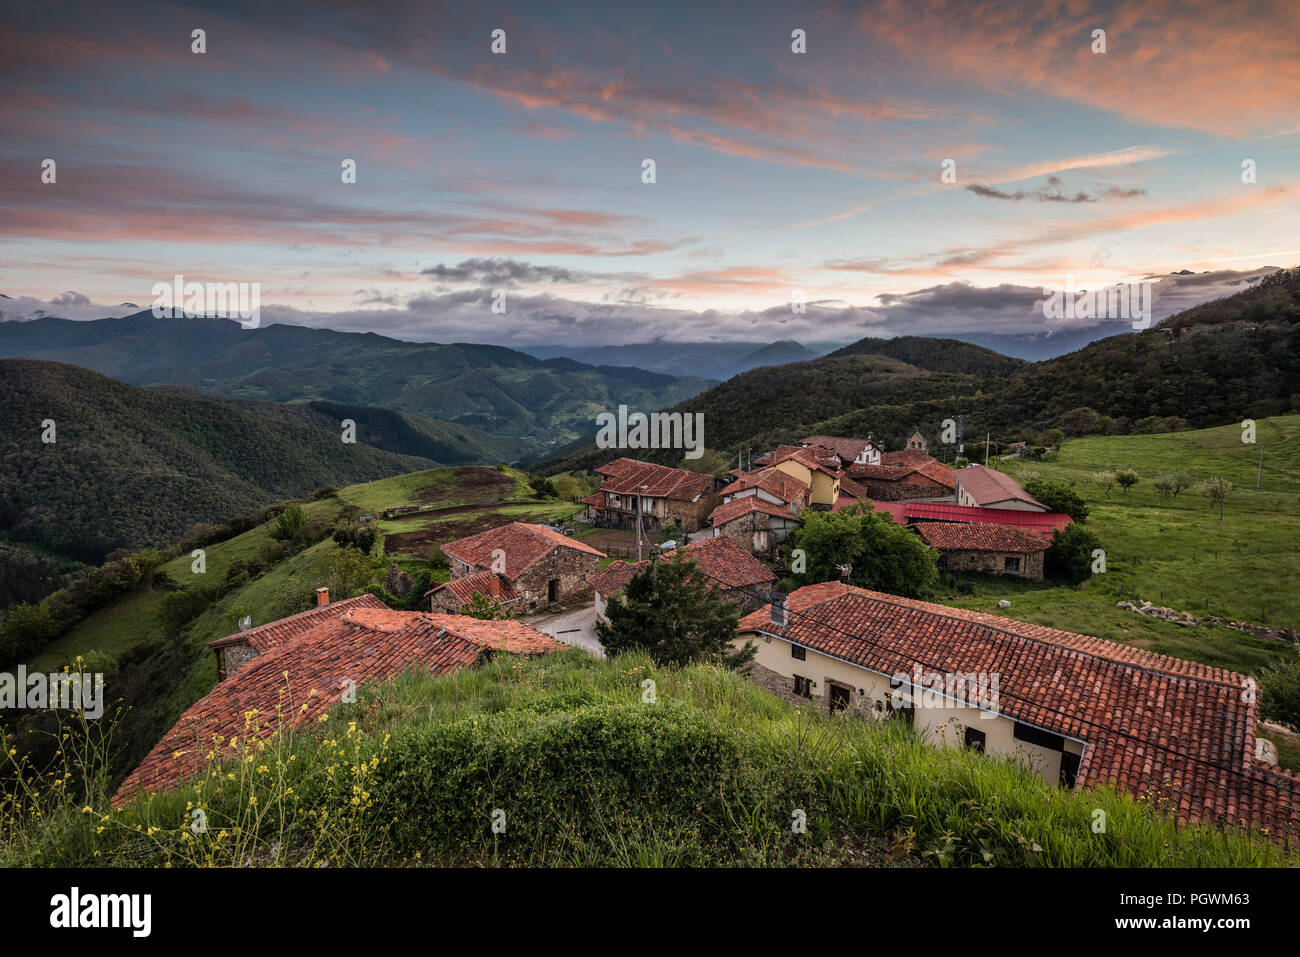 Mountain village Cahecho with typical red tiled roofs, sunset, village Cahecho, near Potes, Picos de Europa, Cantabria, Spain Stock Photo